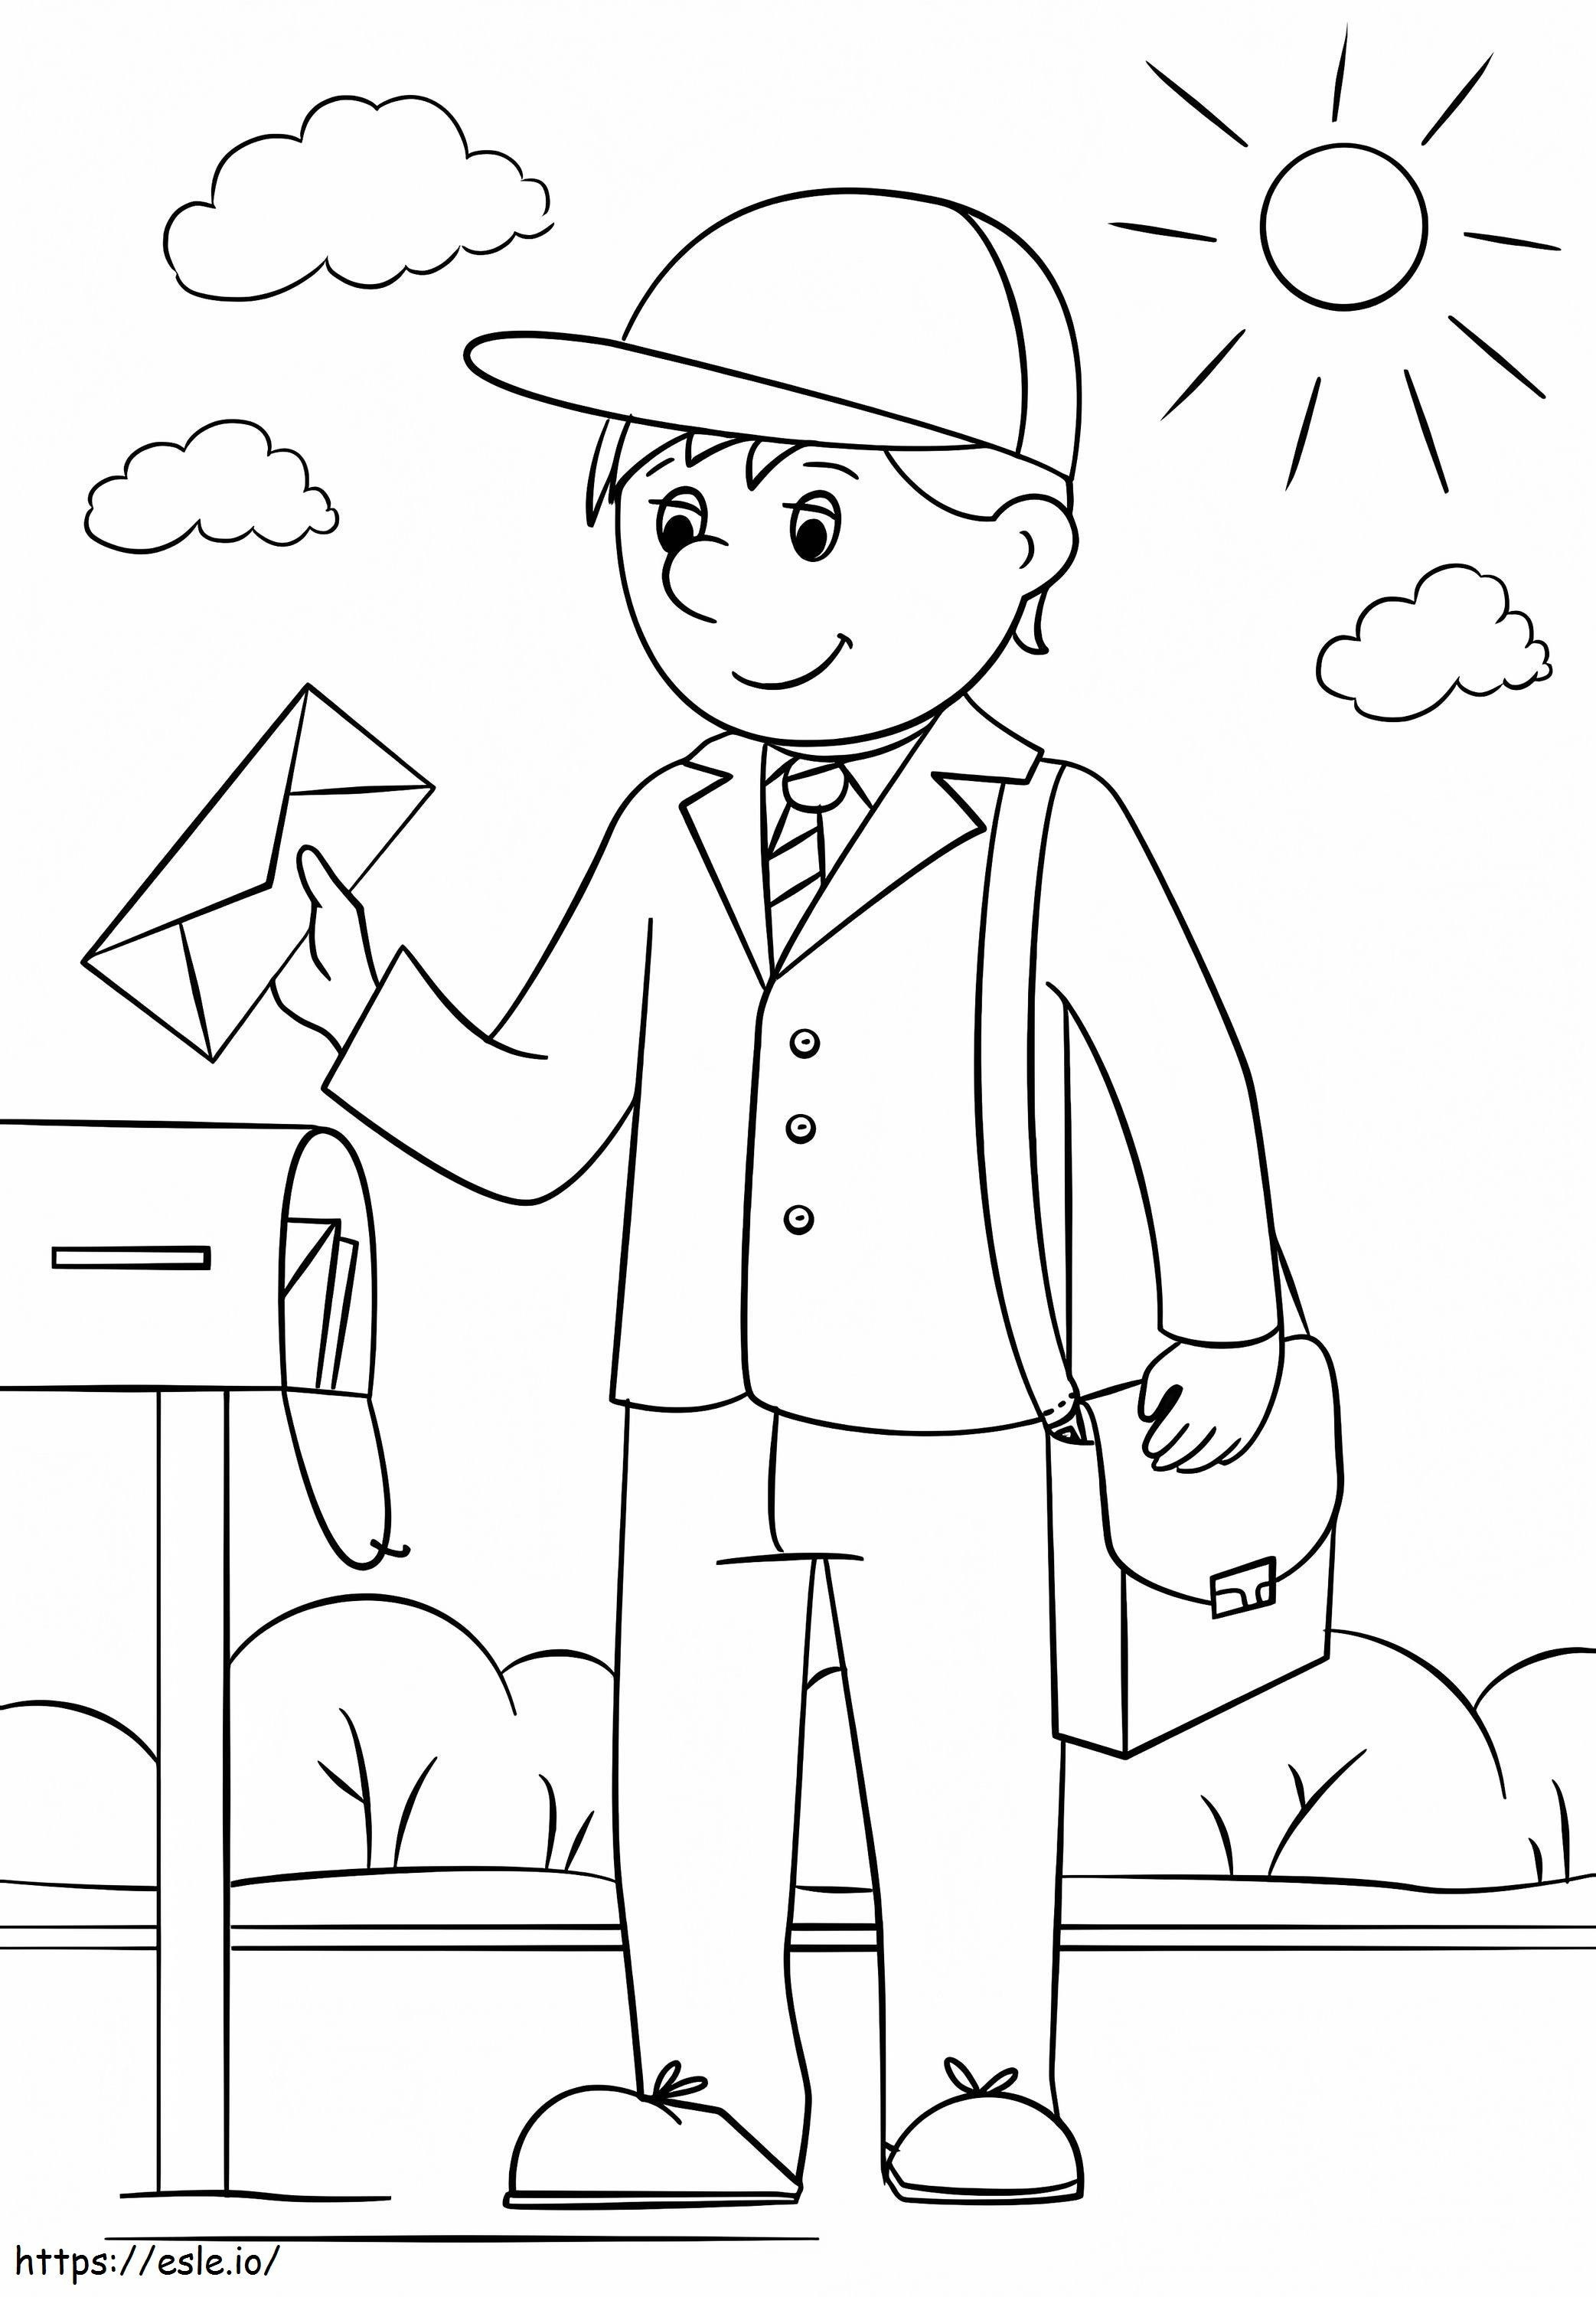 Mail Carrier coloring page